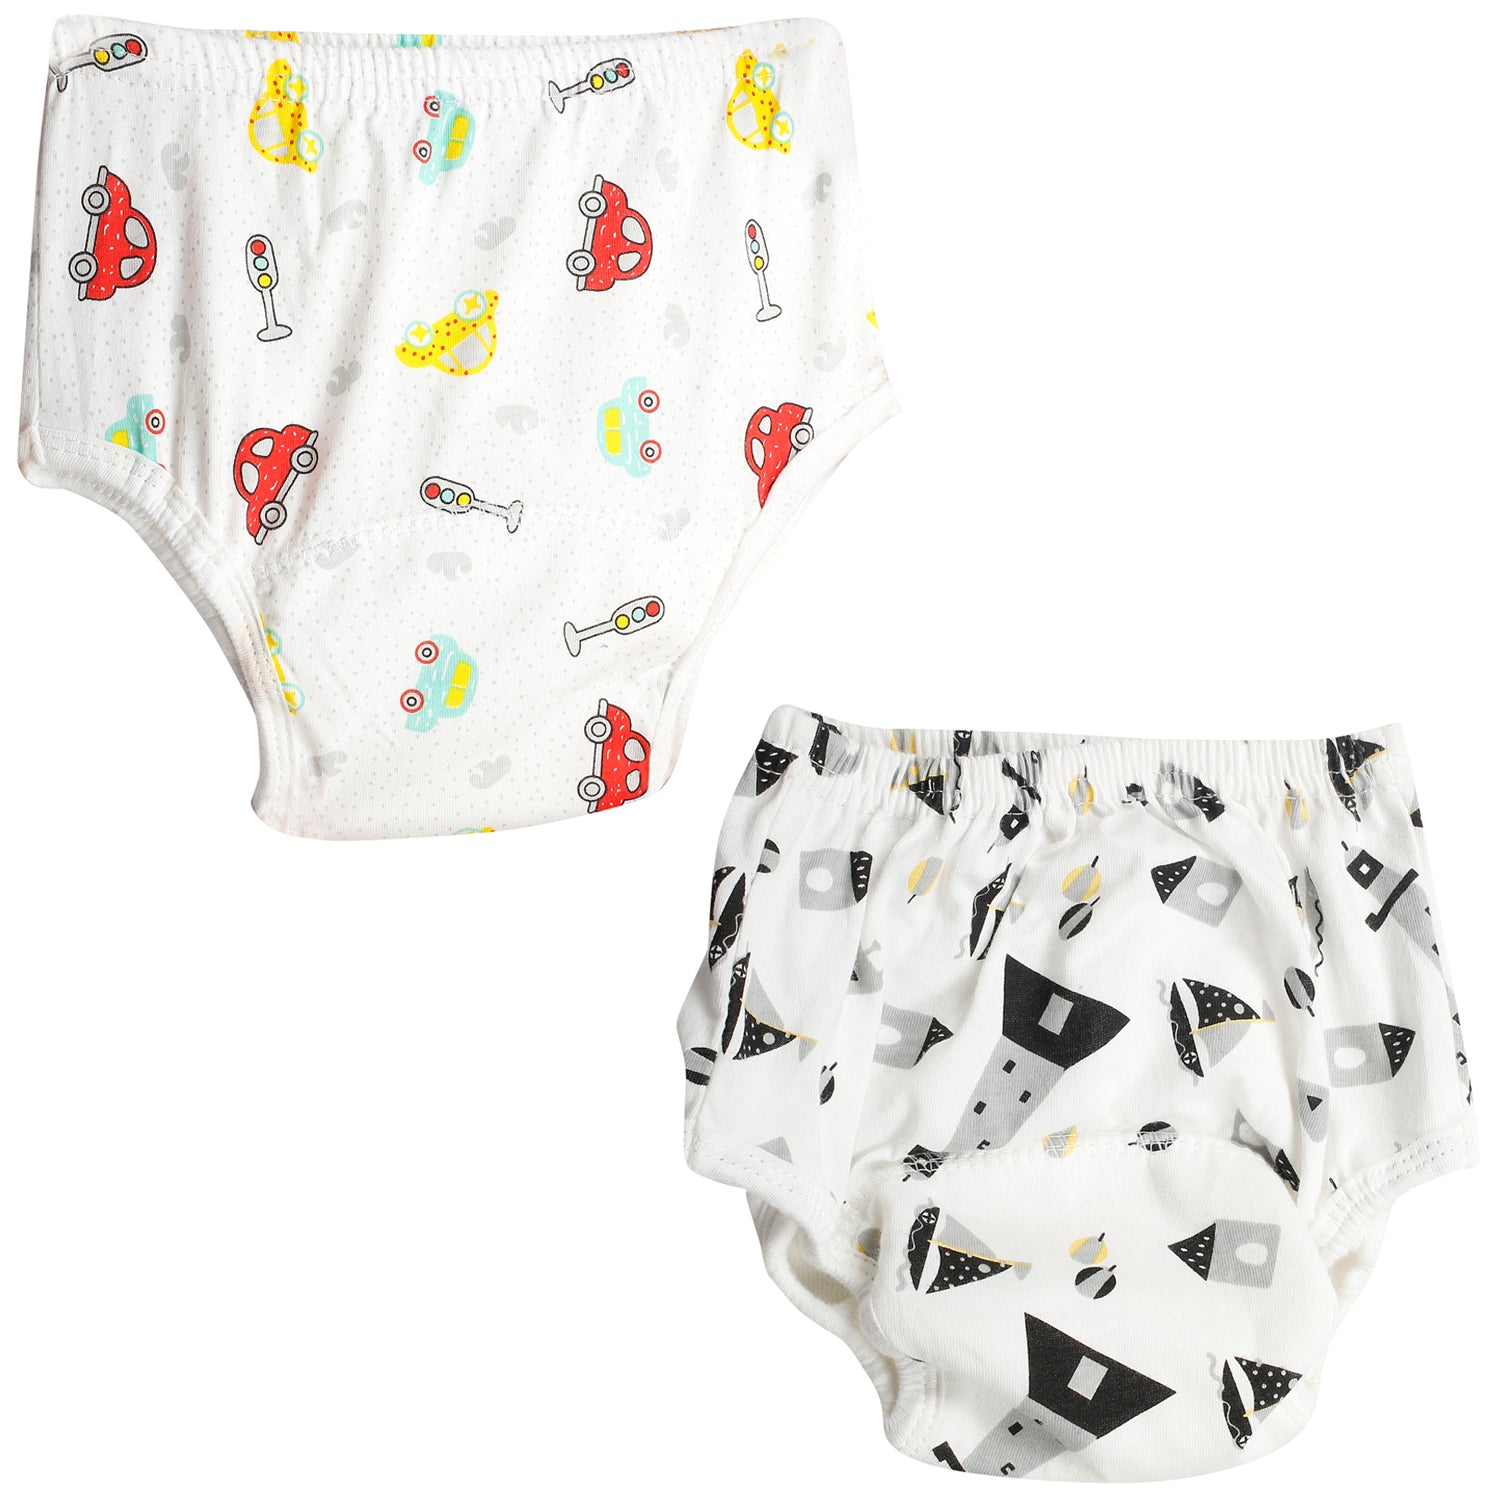 Adjustable & Washable Cloth Diaper Panty 2 Pk Driving And Sailing Multicolour - Baby Moo